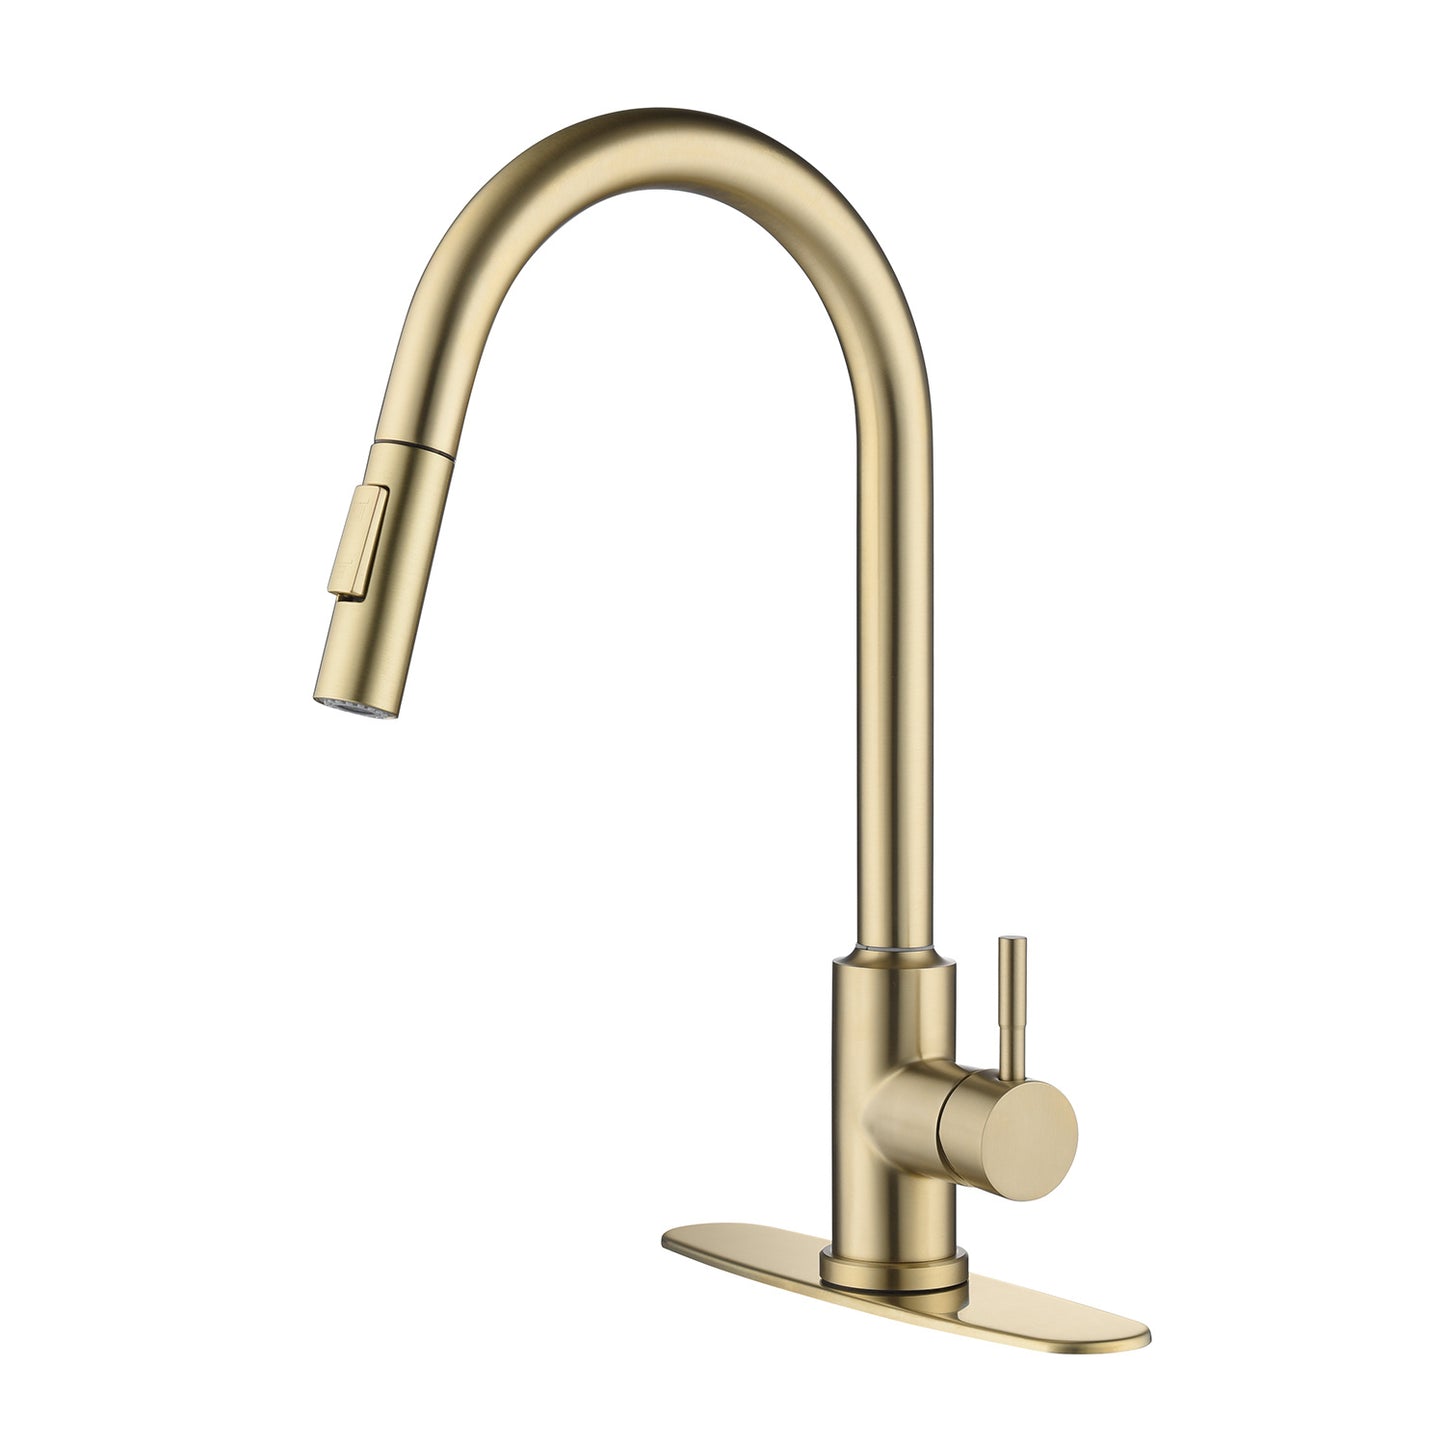 AvaMalis A|M Aquae Touch Kitchen Faucet with Pull Down Sprayer